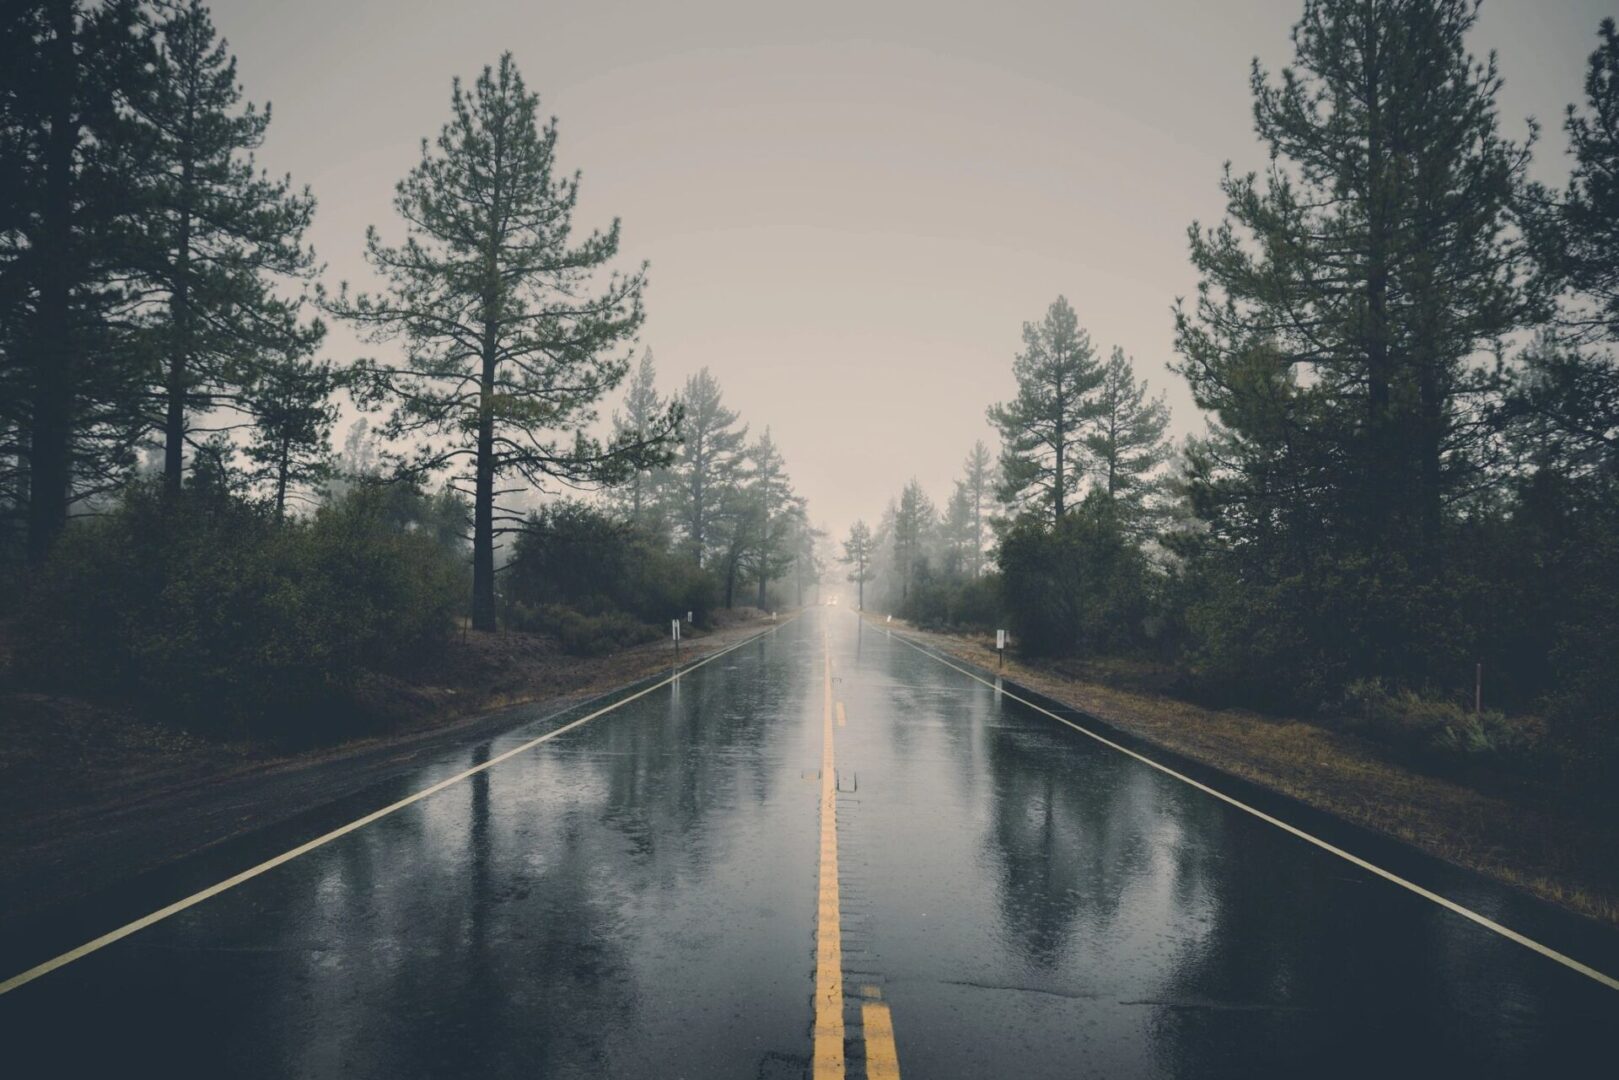 A wet road stretching through a misty forest with overcast skies.